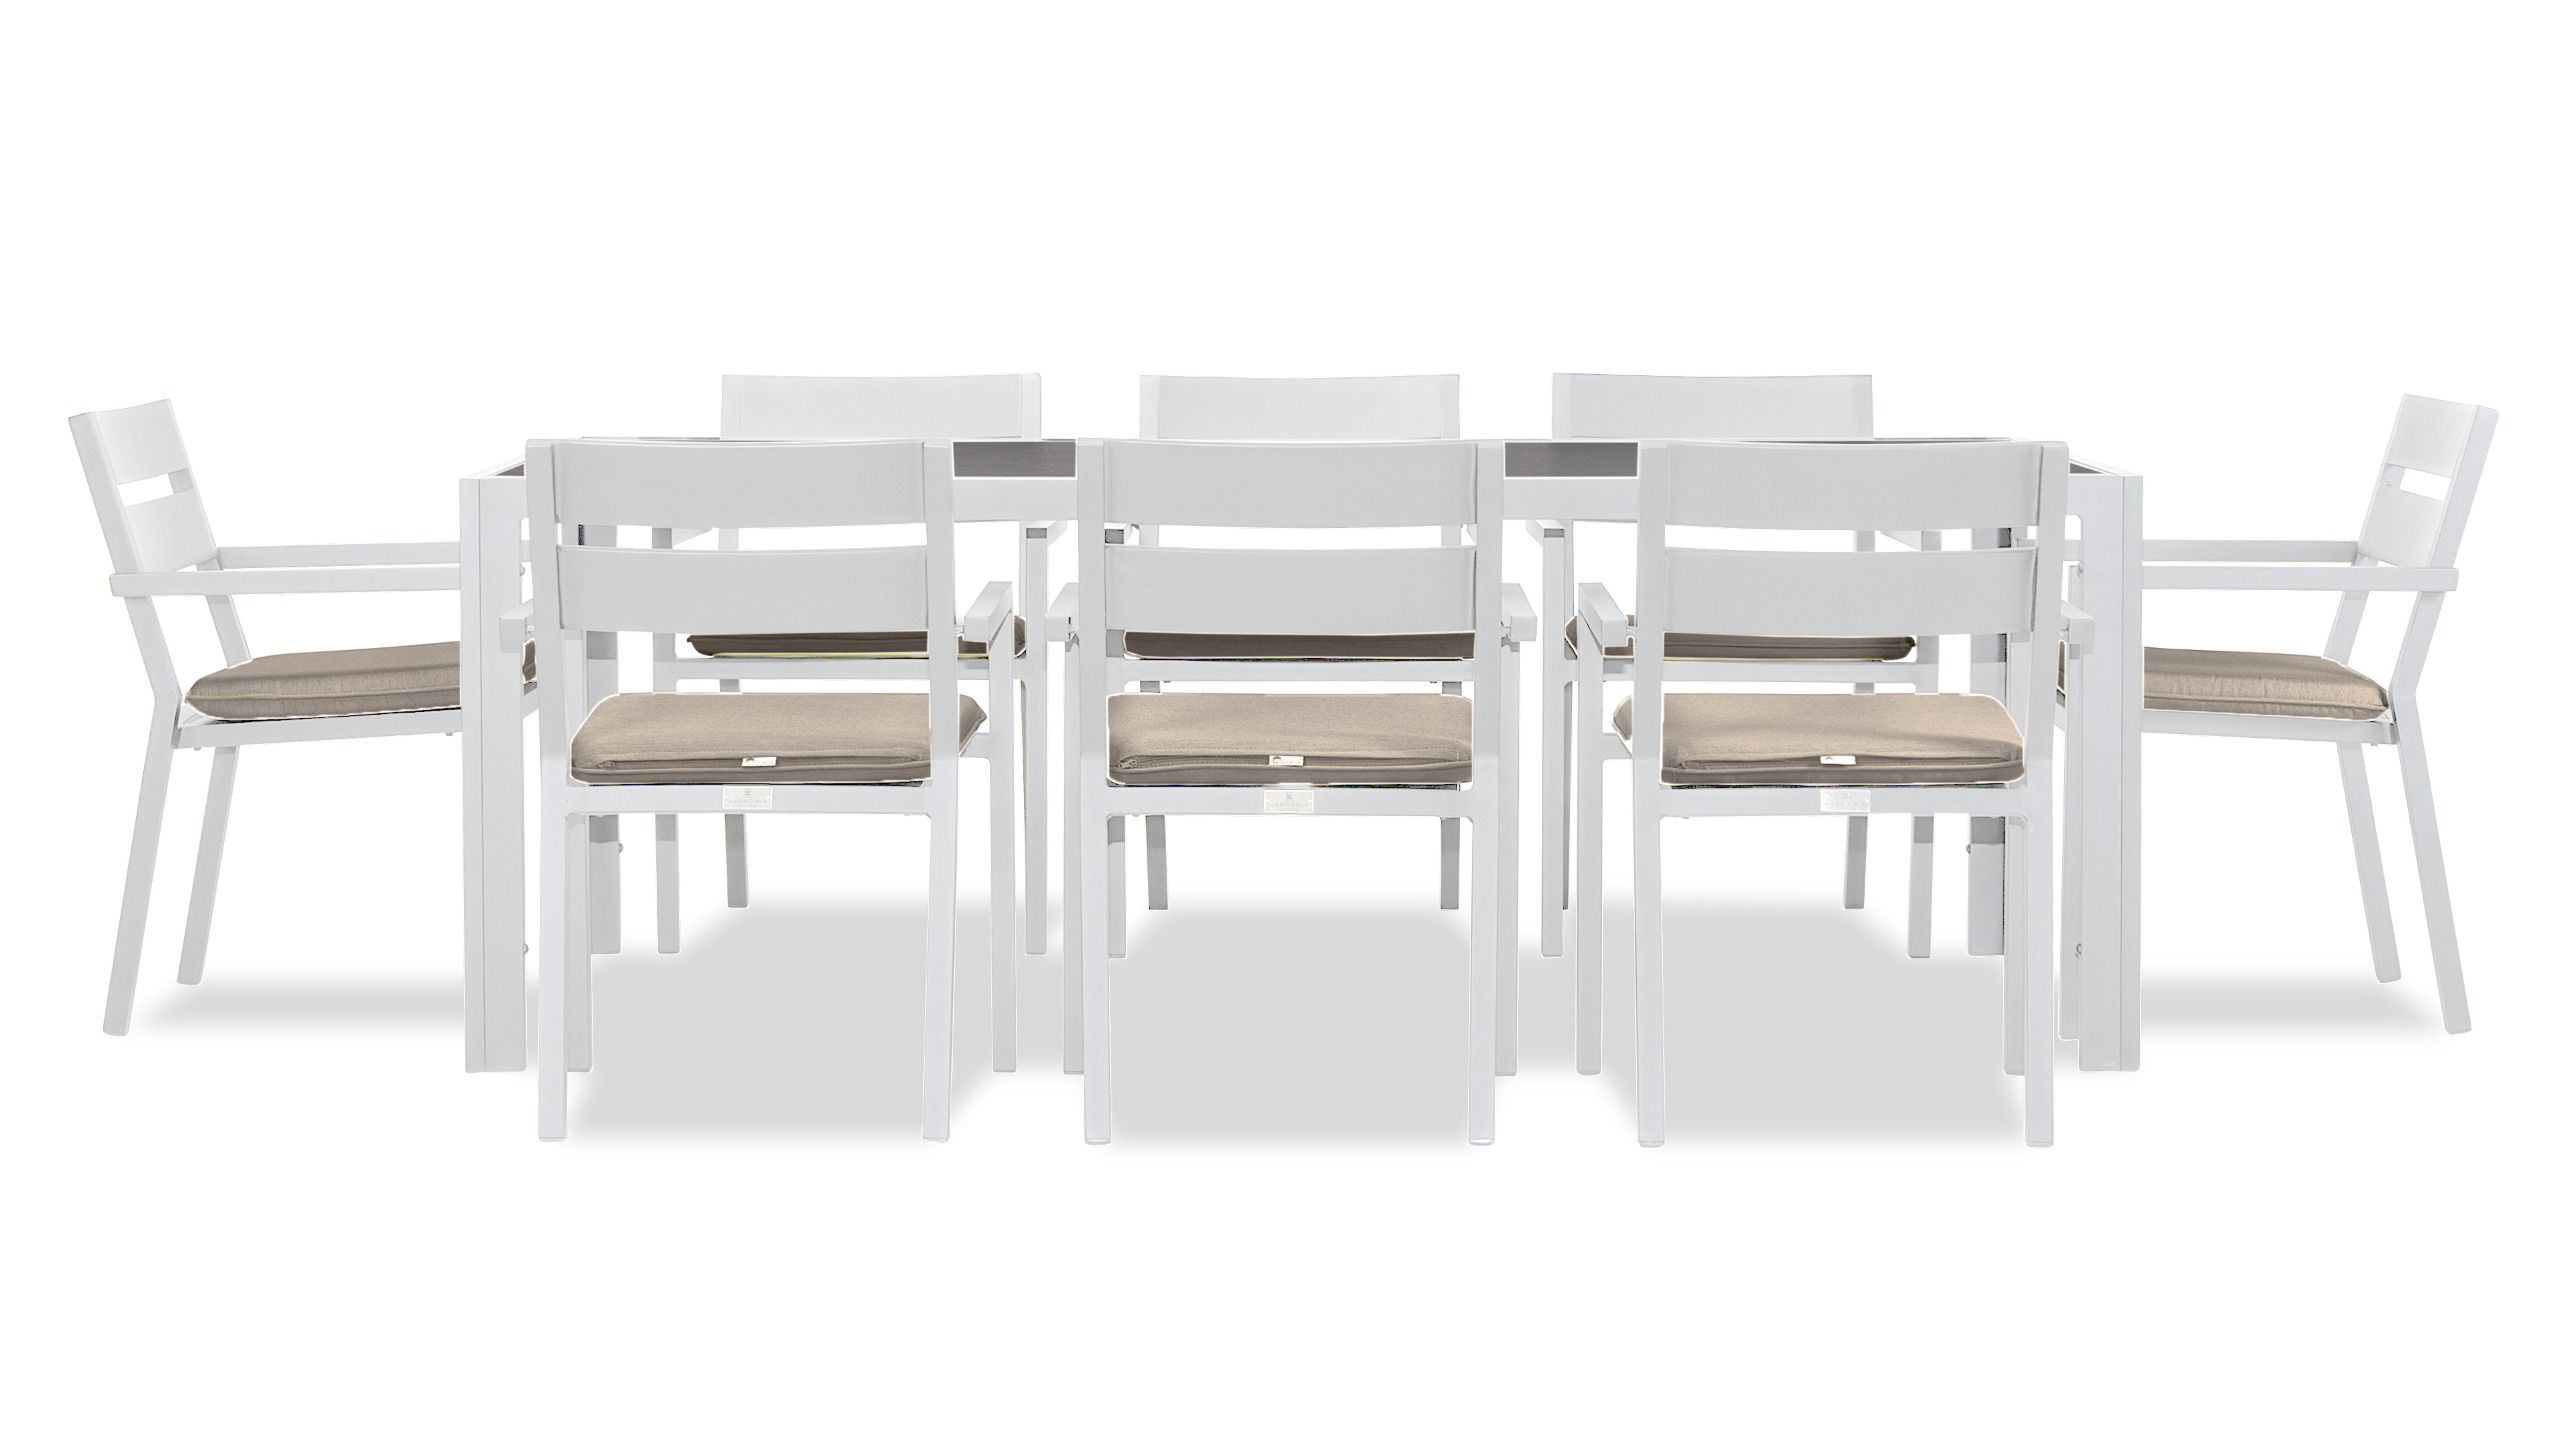 Harmonia Living - Pacifica 9 Piece Dining Set - White | HL-PAC-WHT-9DS